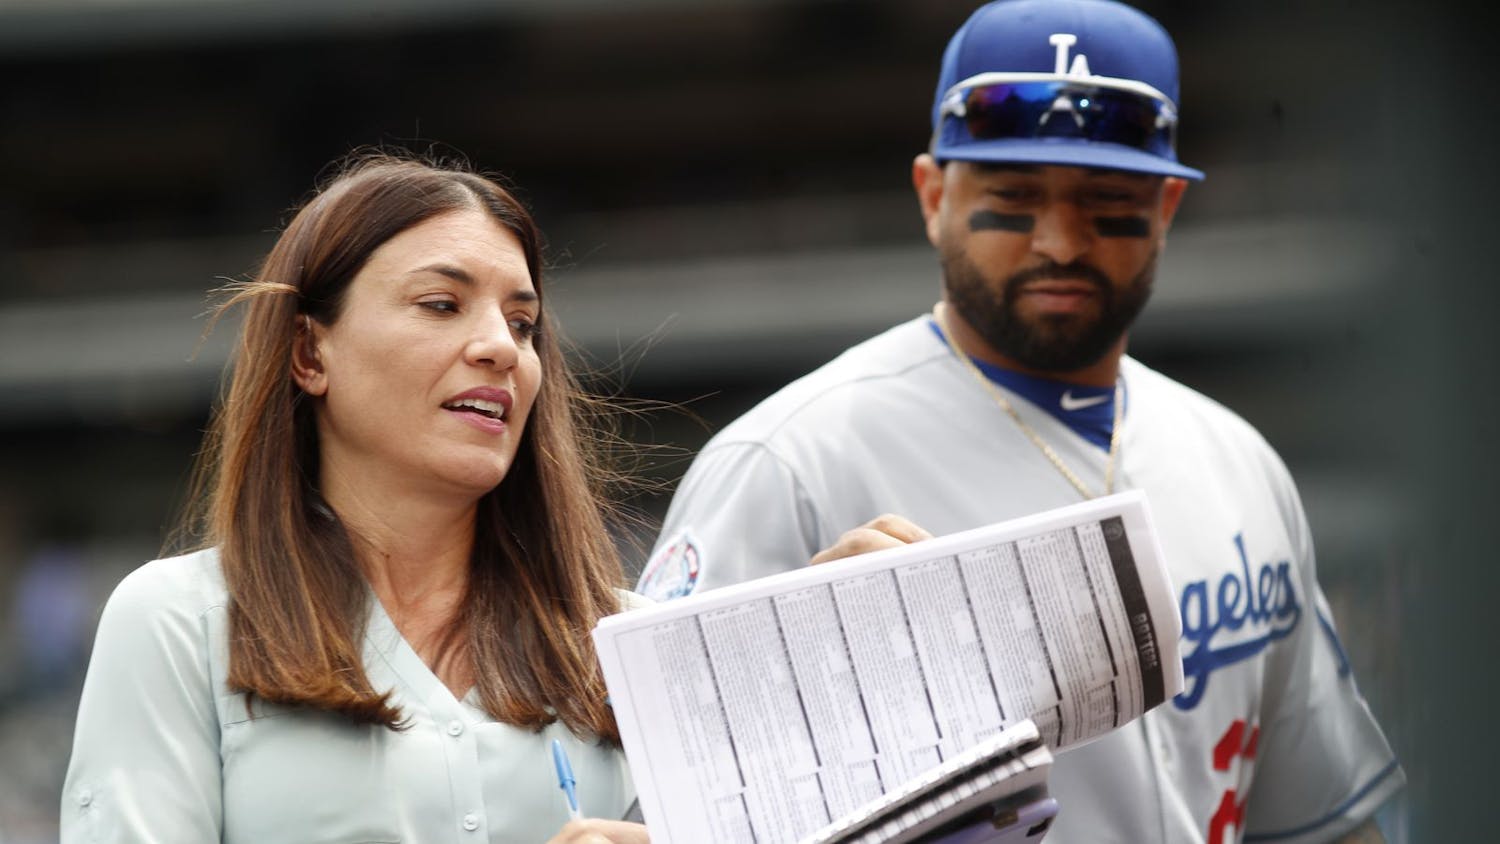 Alanna Rizzo, left, delivers a report before a 2018 game between the Los Angeles Dodgers and Colorado Rockies in Denver as then-Dodgers left fielder Matt Kemp looks on. Rizzo on Tuesday night will be part of Major League Baseball’s first all-female broadcasting crew. [ DAVID ZALUBOWSKI | AP ]